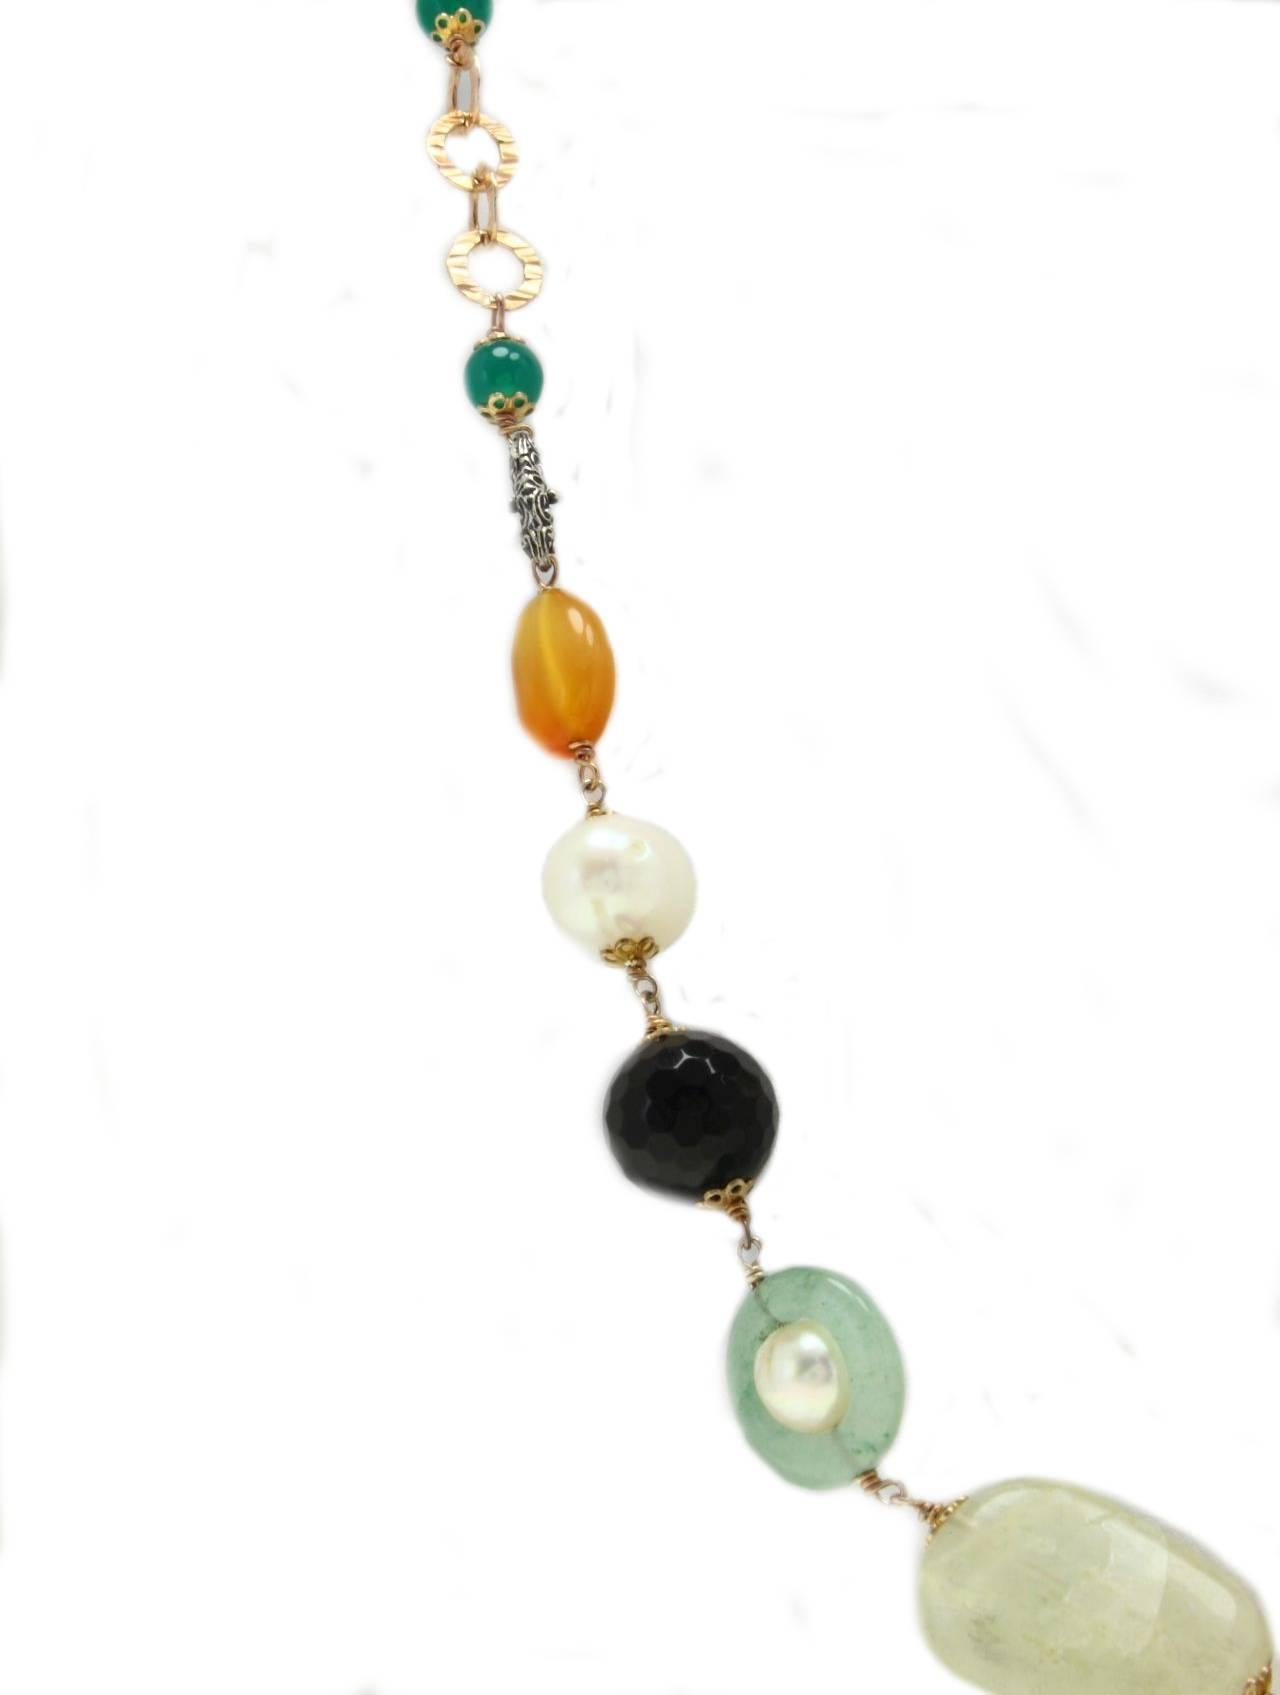 Link necklace in 9k gold and silver composed of onyx, pearls, green agate, carnelian and other hard stones.
Hard Stones, Pearls 93.50 gr
Tot.Weight 126.40 gr
R.F iuh
